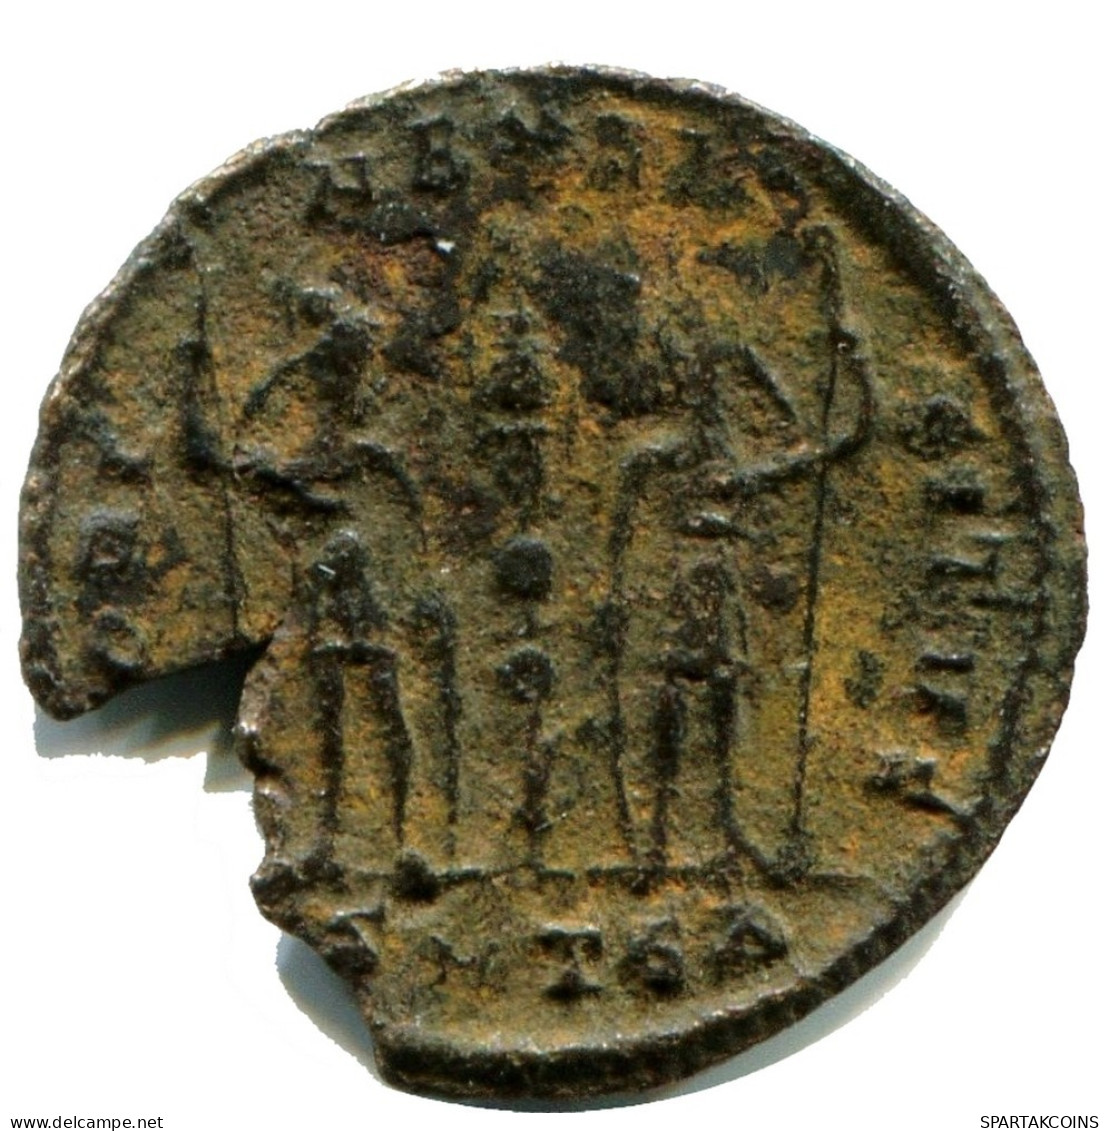 CONSTANS MINTED IN THESSALONICA FOUND IN IHNASYAH HOARD EGYPT #ANC11914.14.E.A - The Christian Empire (307 AD To 363 AD)